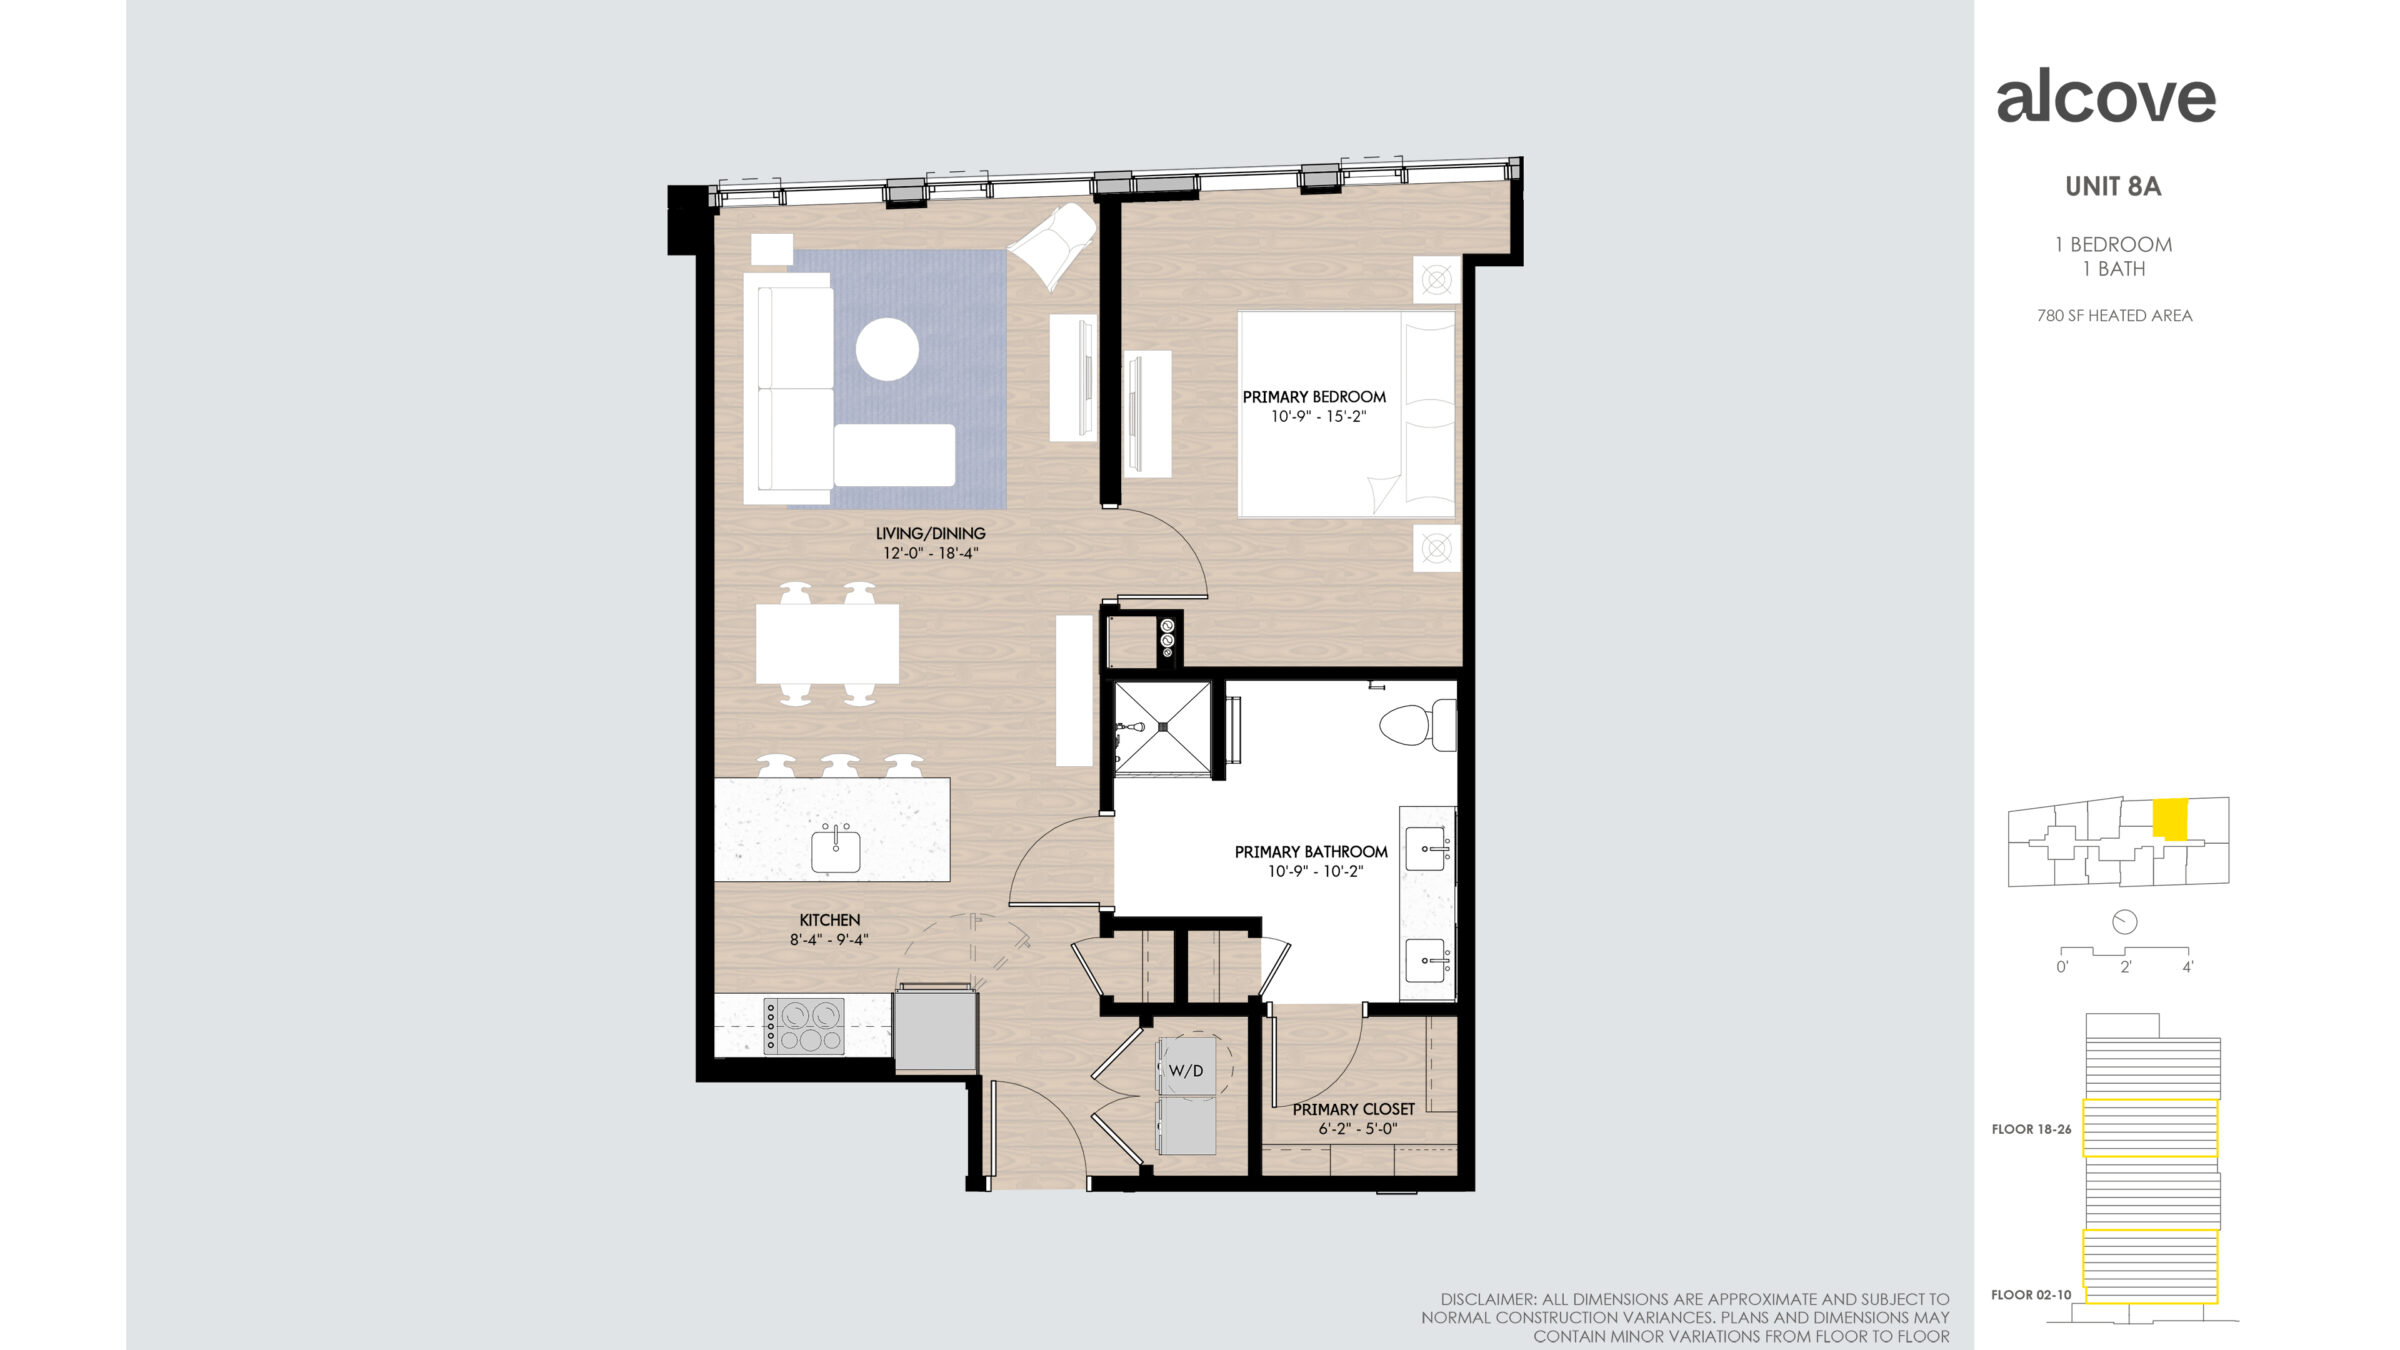 Image reads: UNIT 8A 1 BEDROOM 1 BATH 780 SF HEATED AREA Floors 18-26 Floors 02-10 Disclaimer: all dimensions are approximate and subject to normal construction variances. Plans and dimensions may contain minor variations from floor to floor.